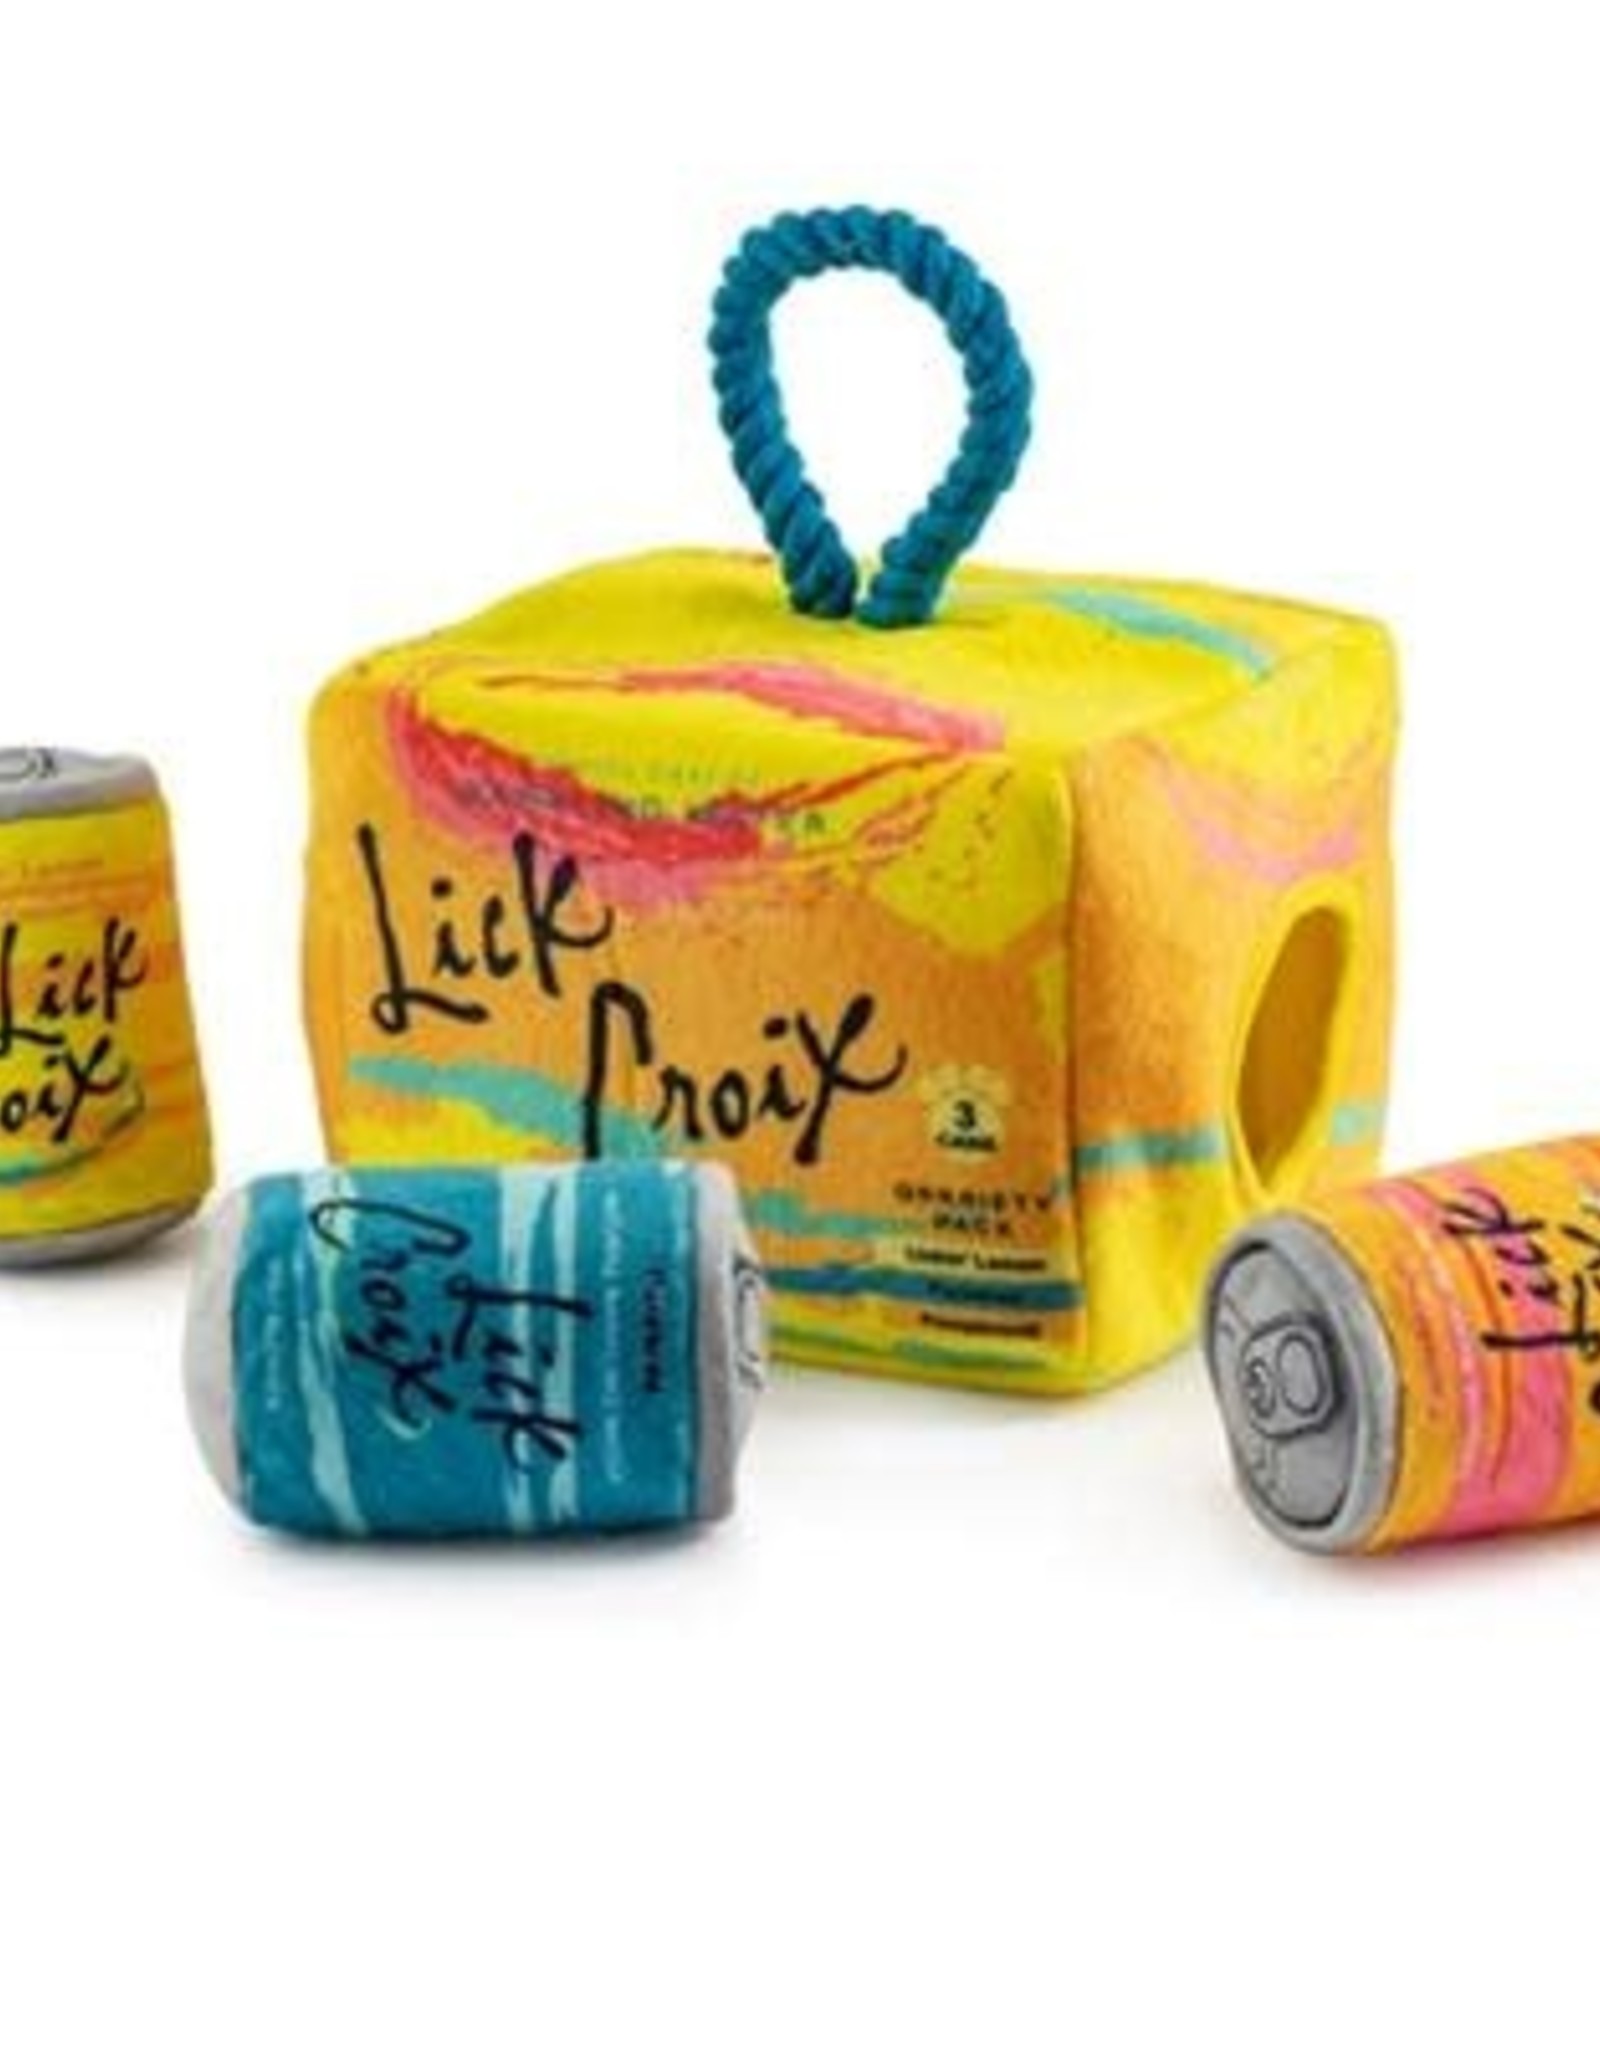 Haute Diggity Dog LickCroix Grrriety Pack - Activity House